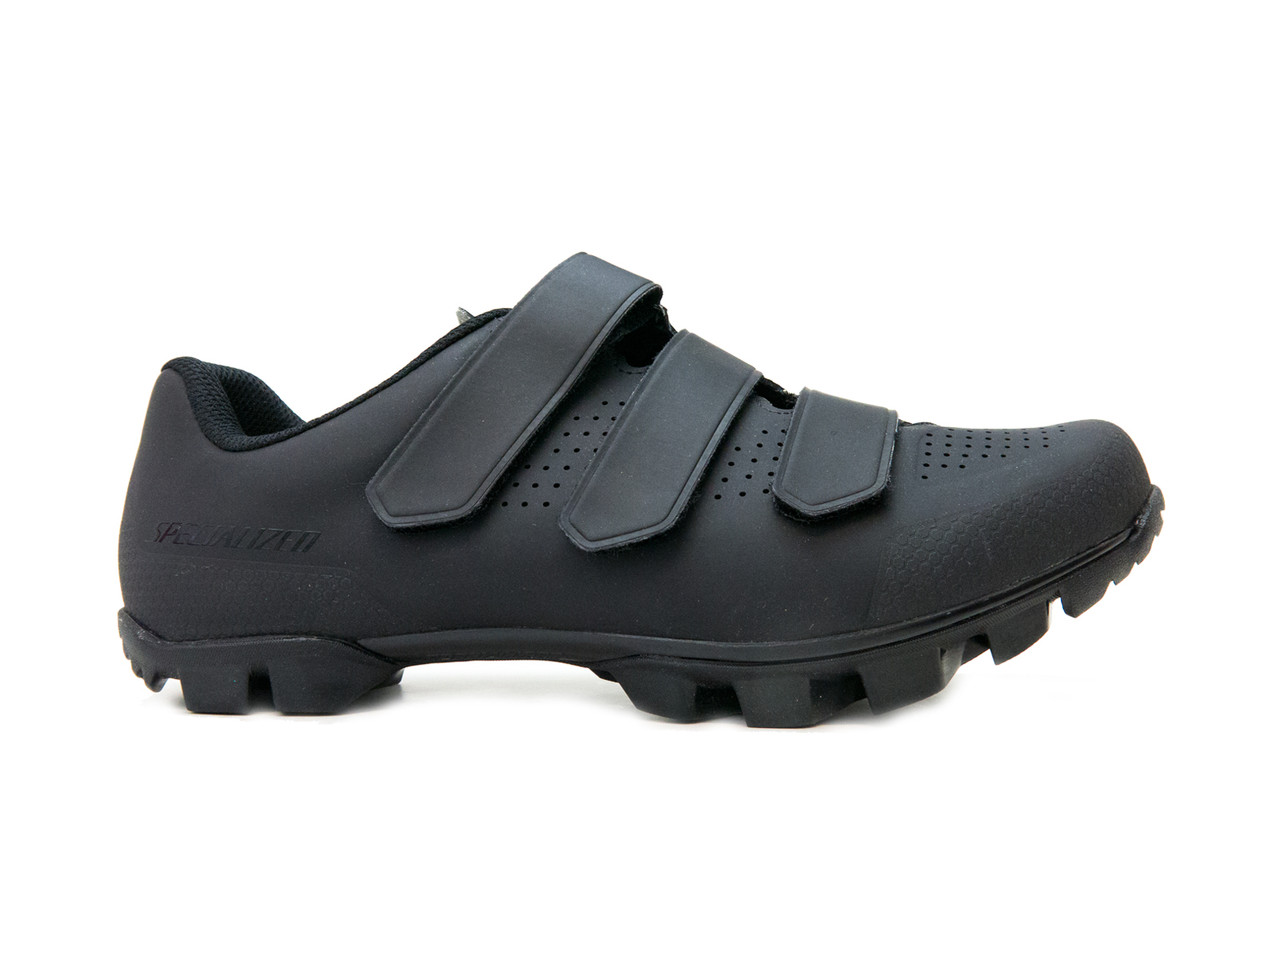 specialized sport touring shoes